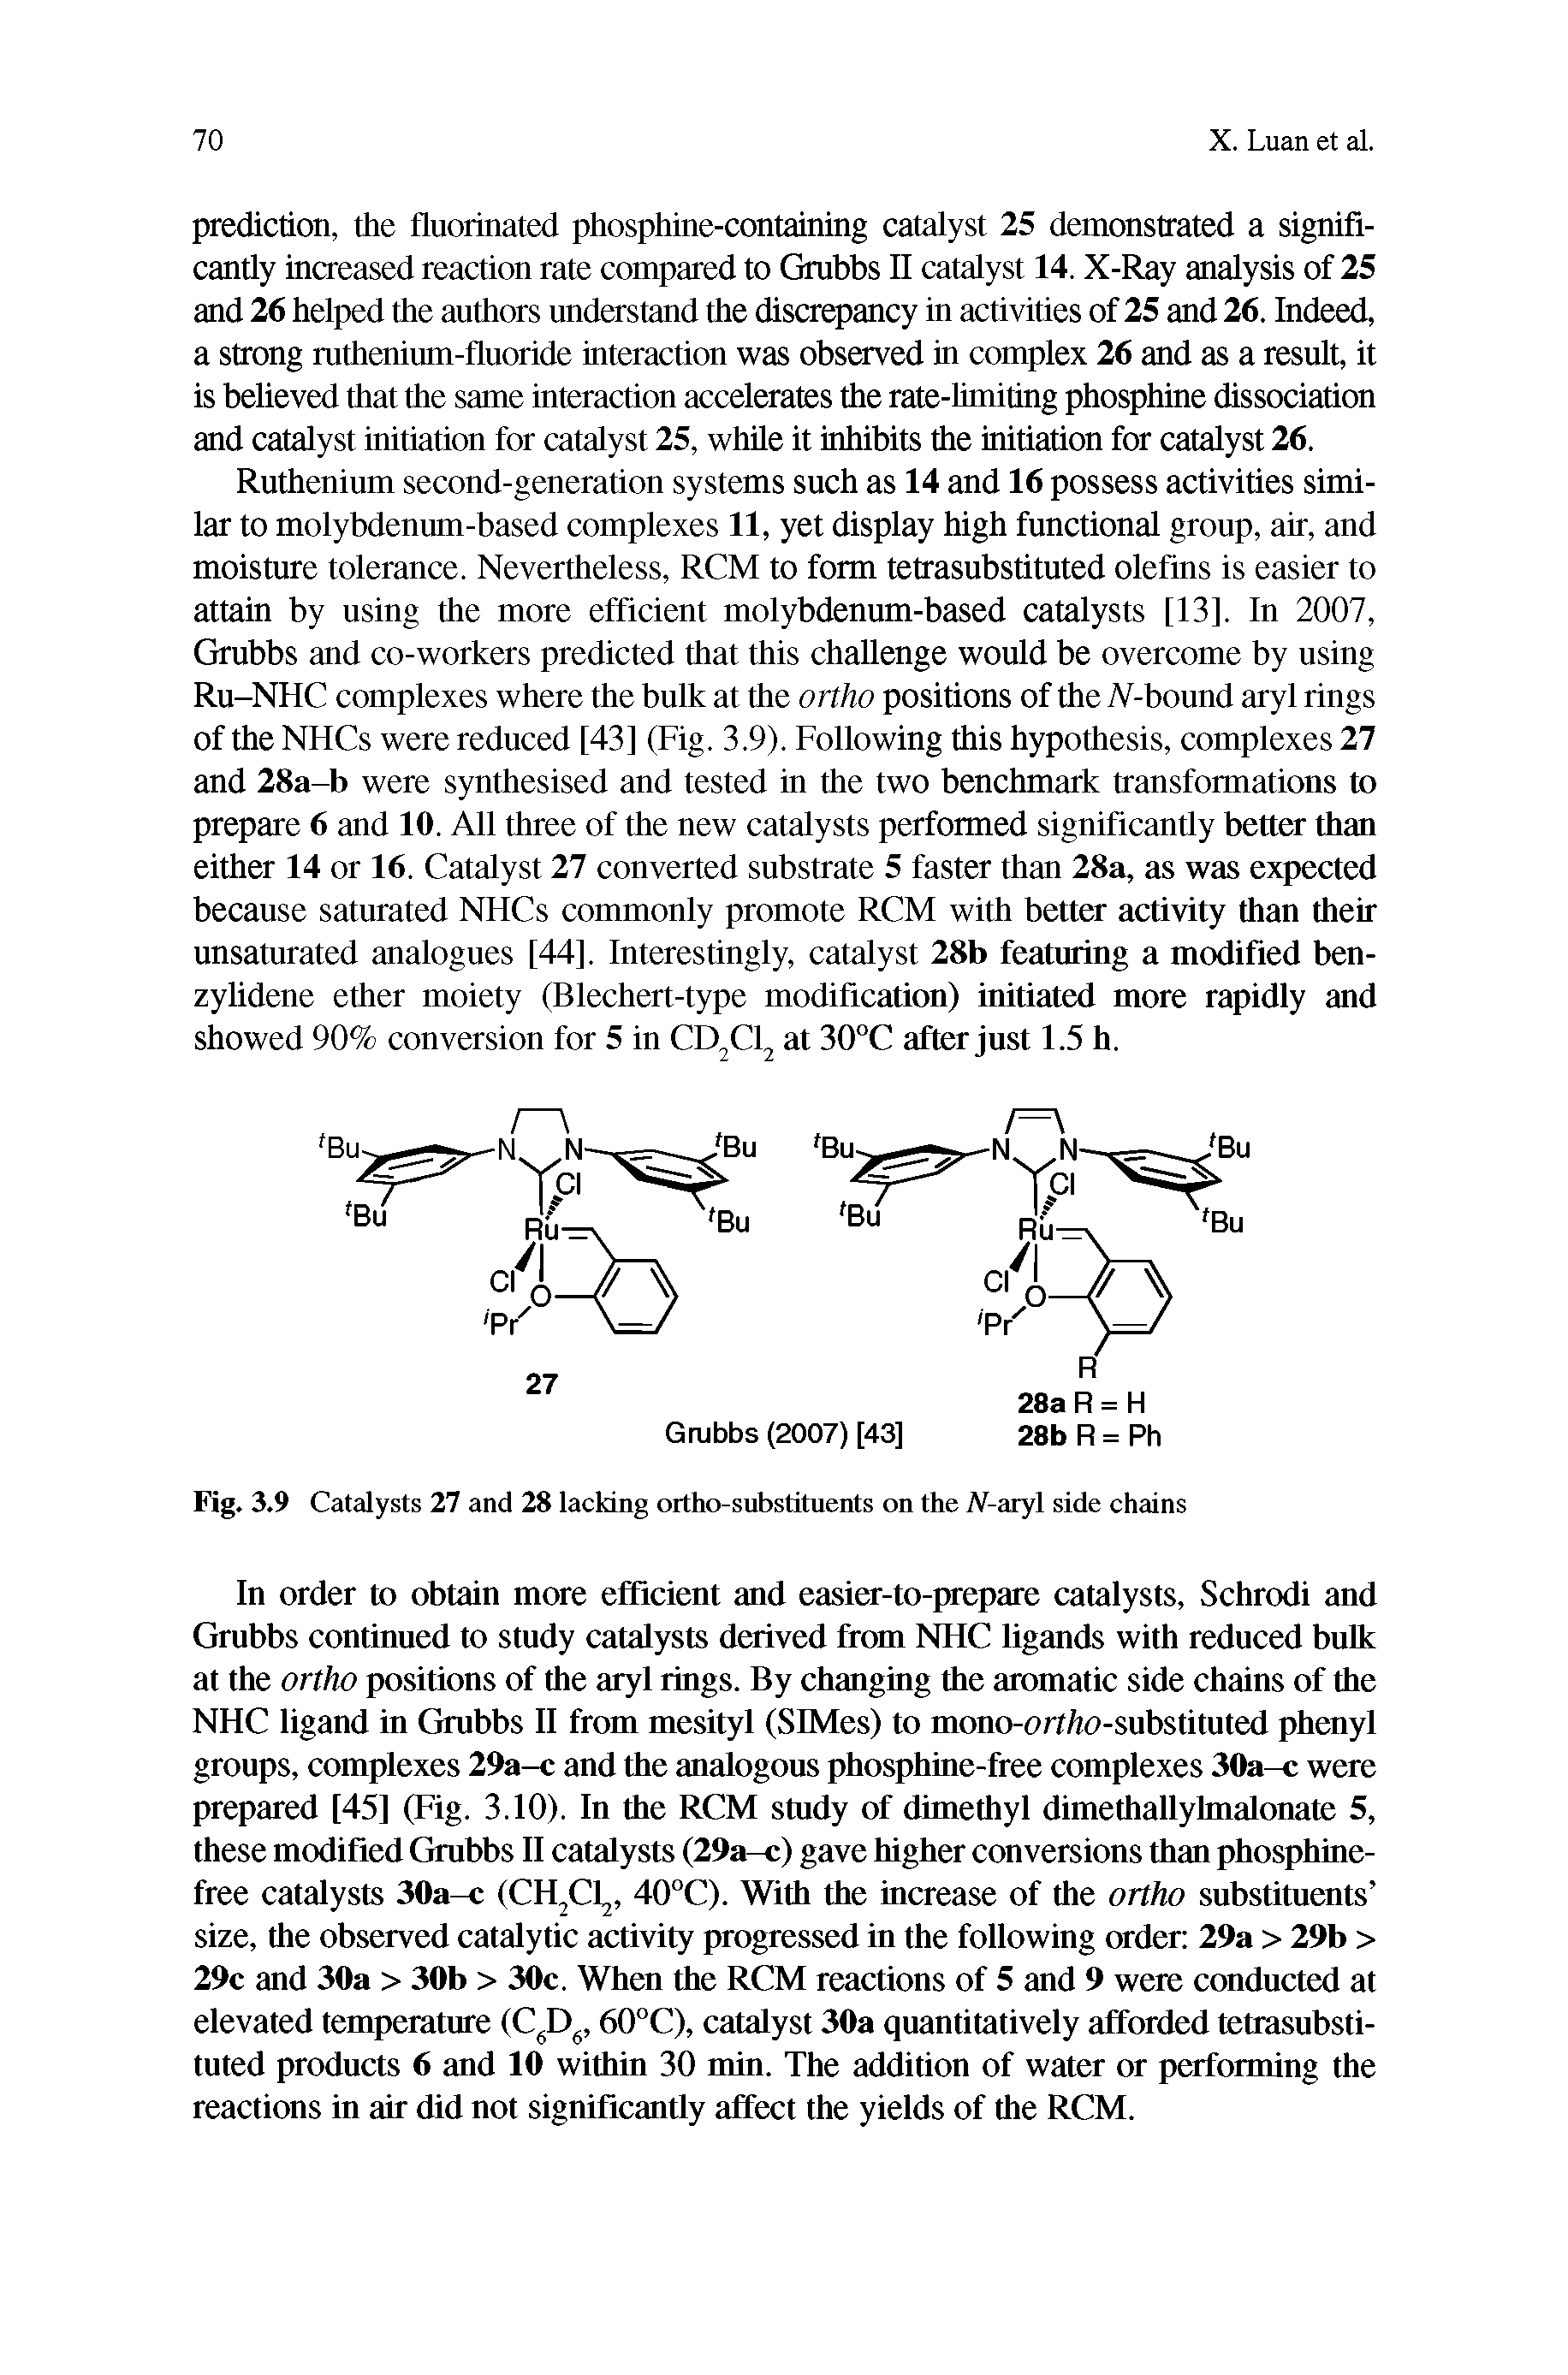 Fig. 3.9 Catalysts 27 and 28 lacking ortho-substituents on the iV-aryl side chains...